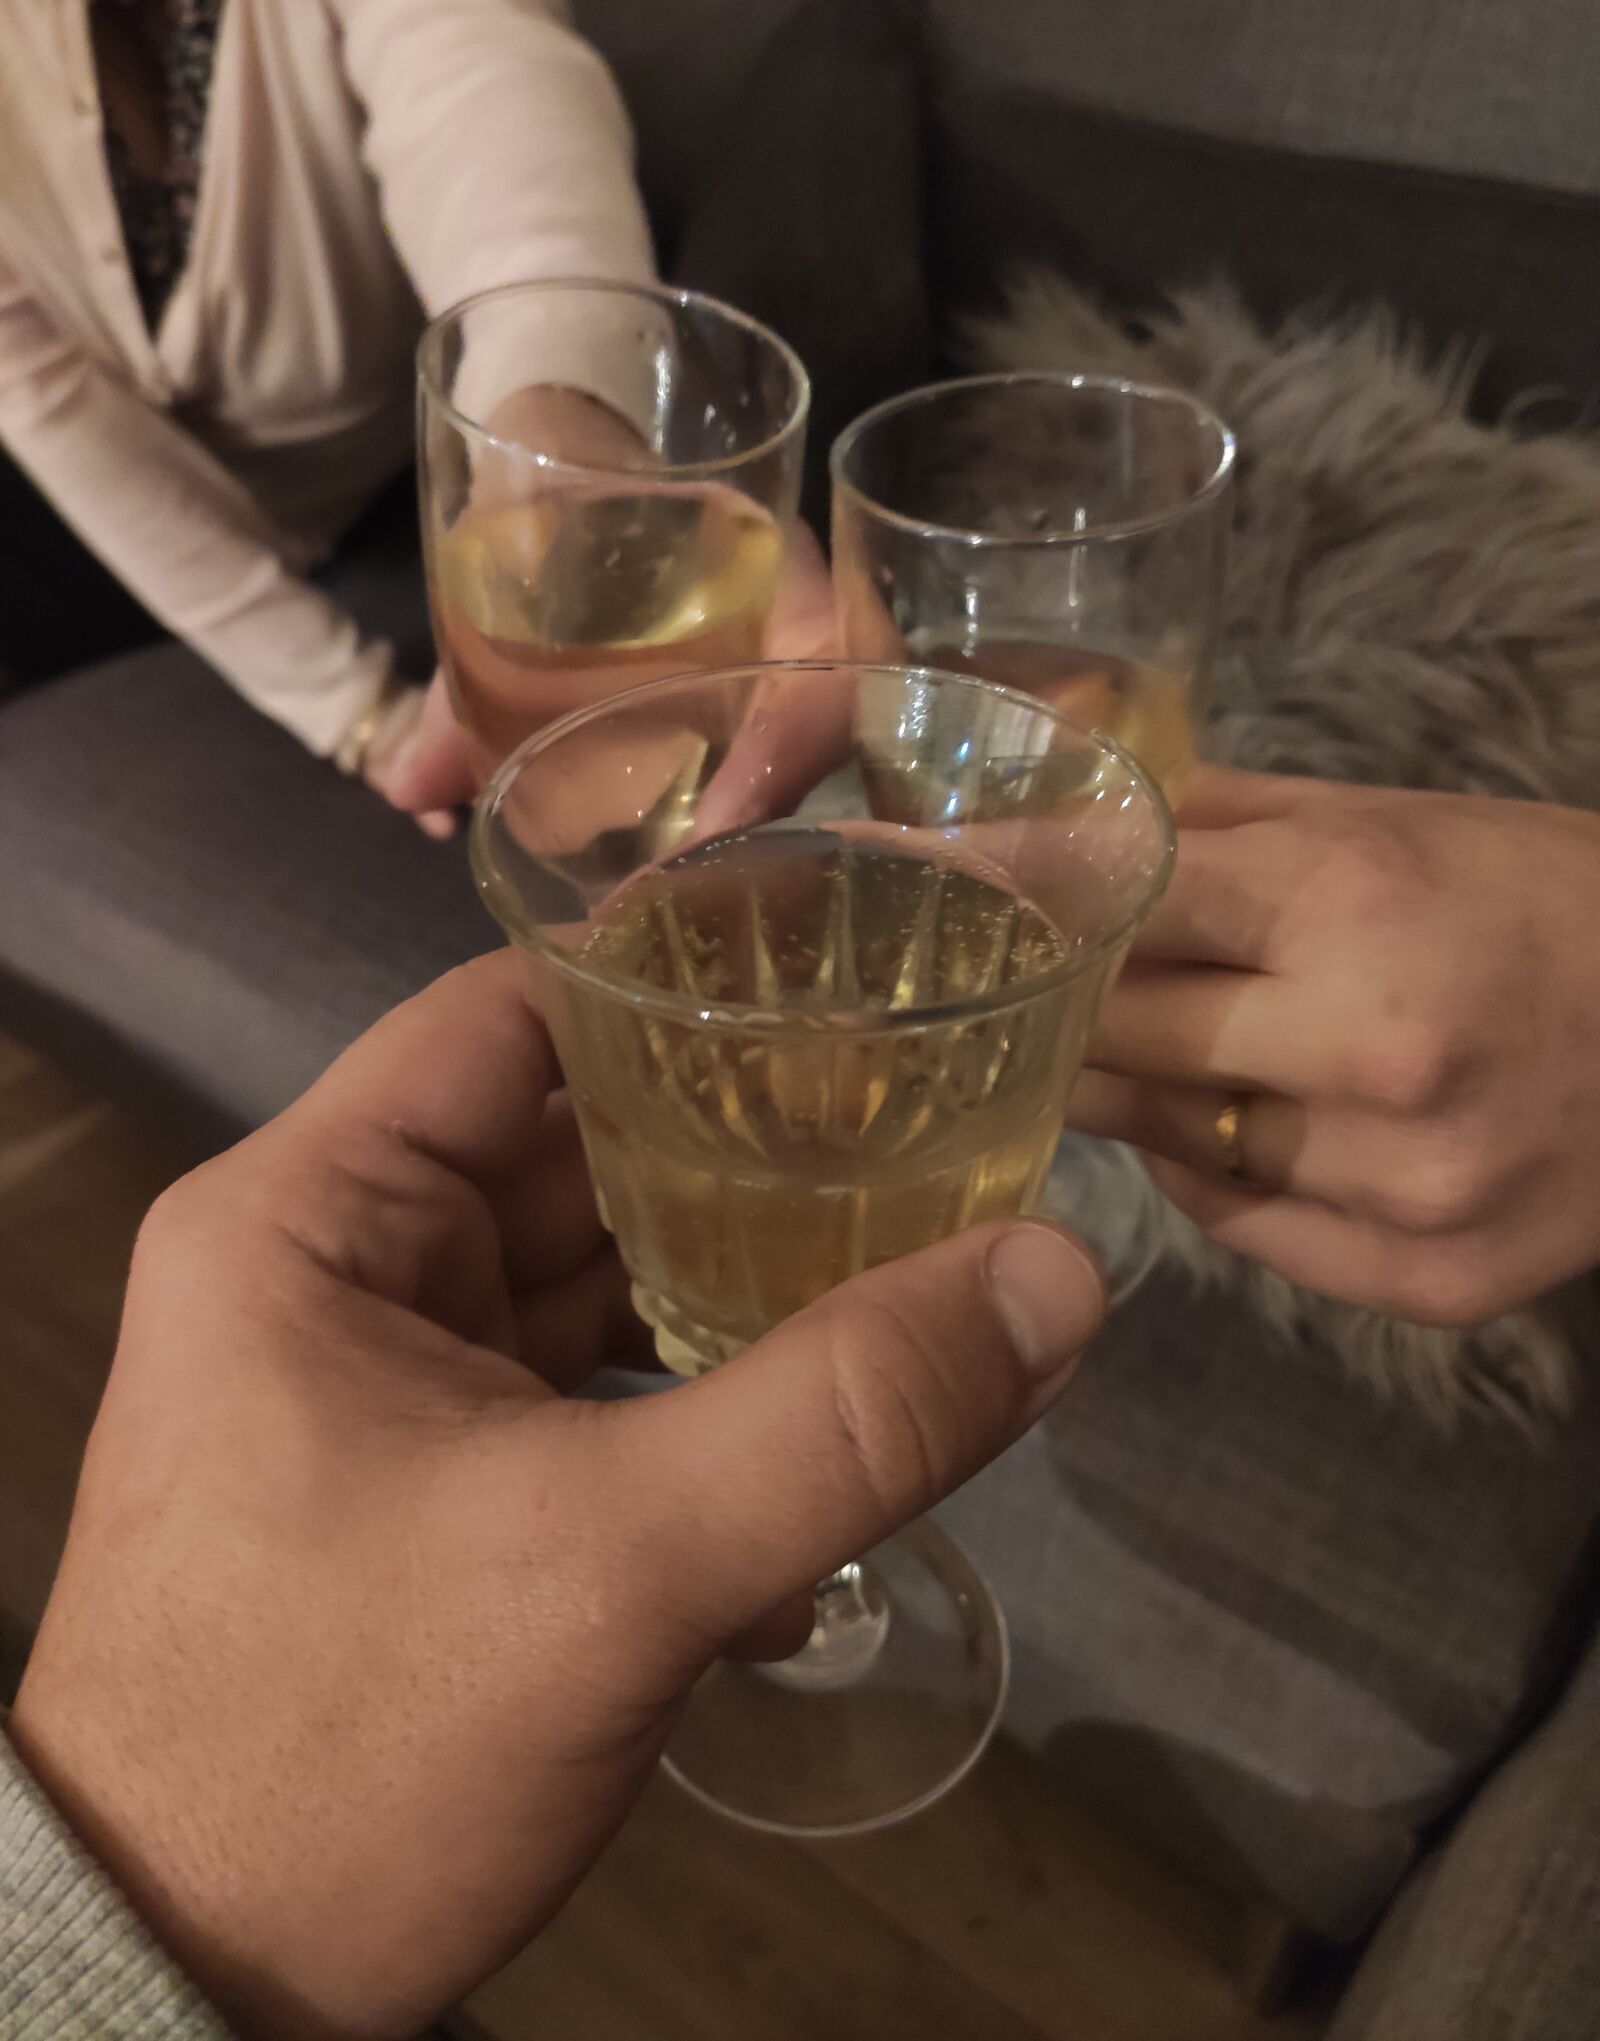 Xiaomi Mi 9T sample photo. Champagne, party, friend photography